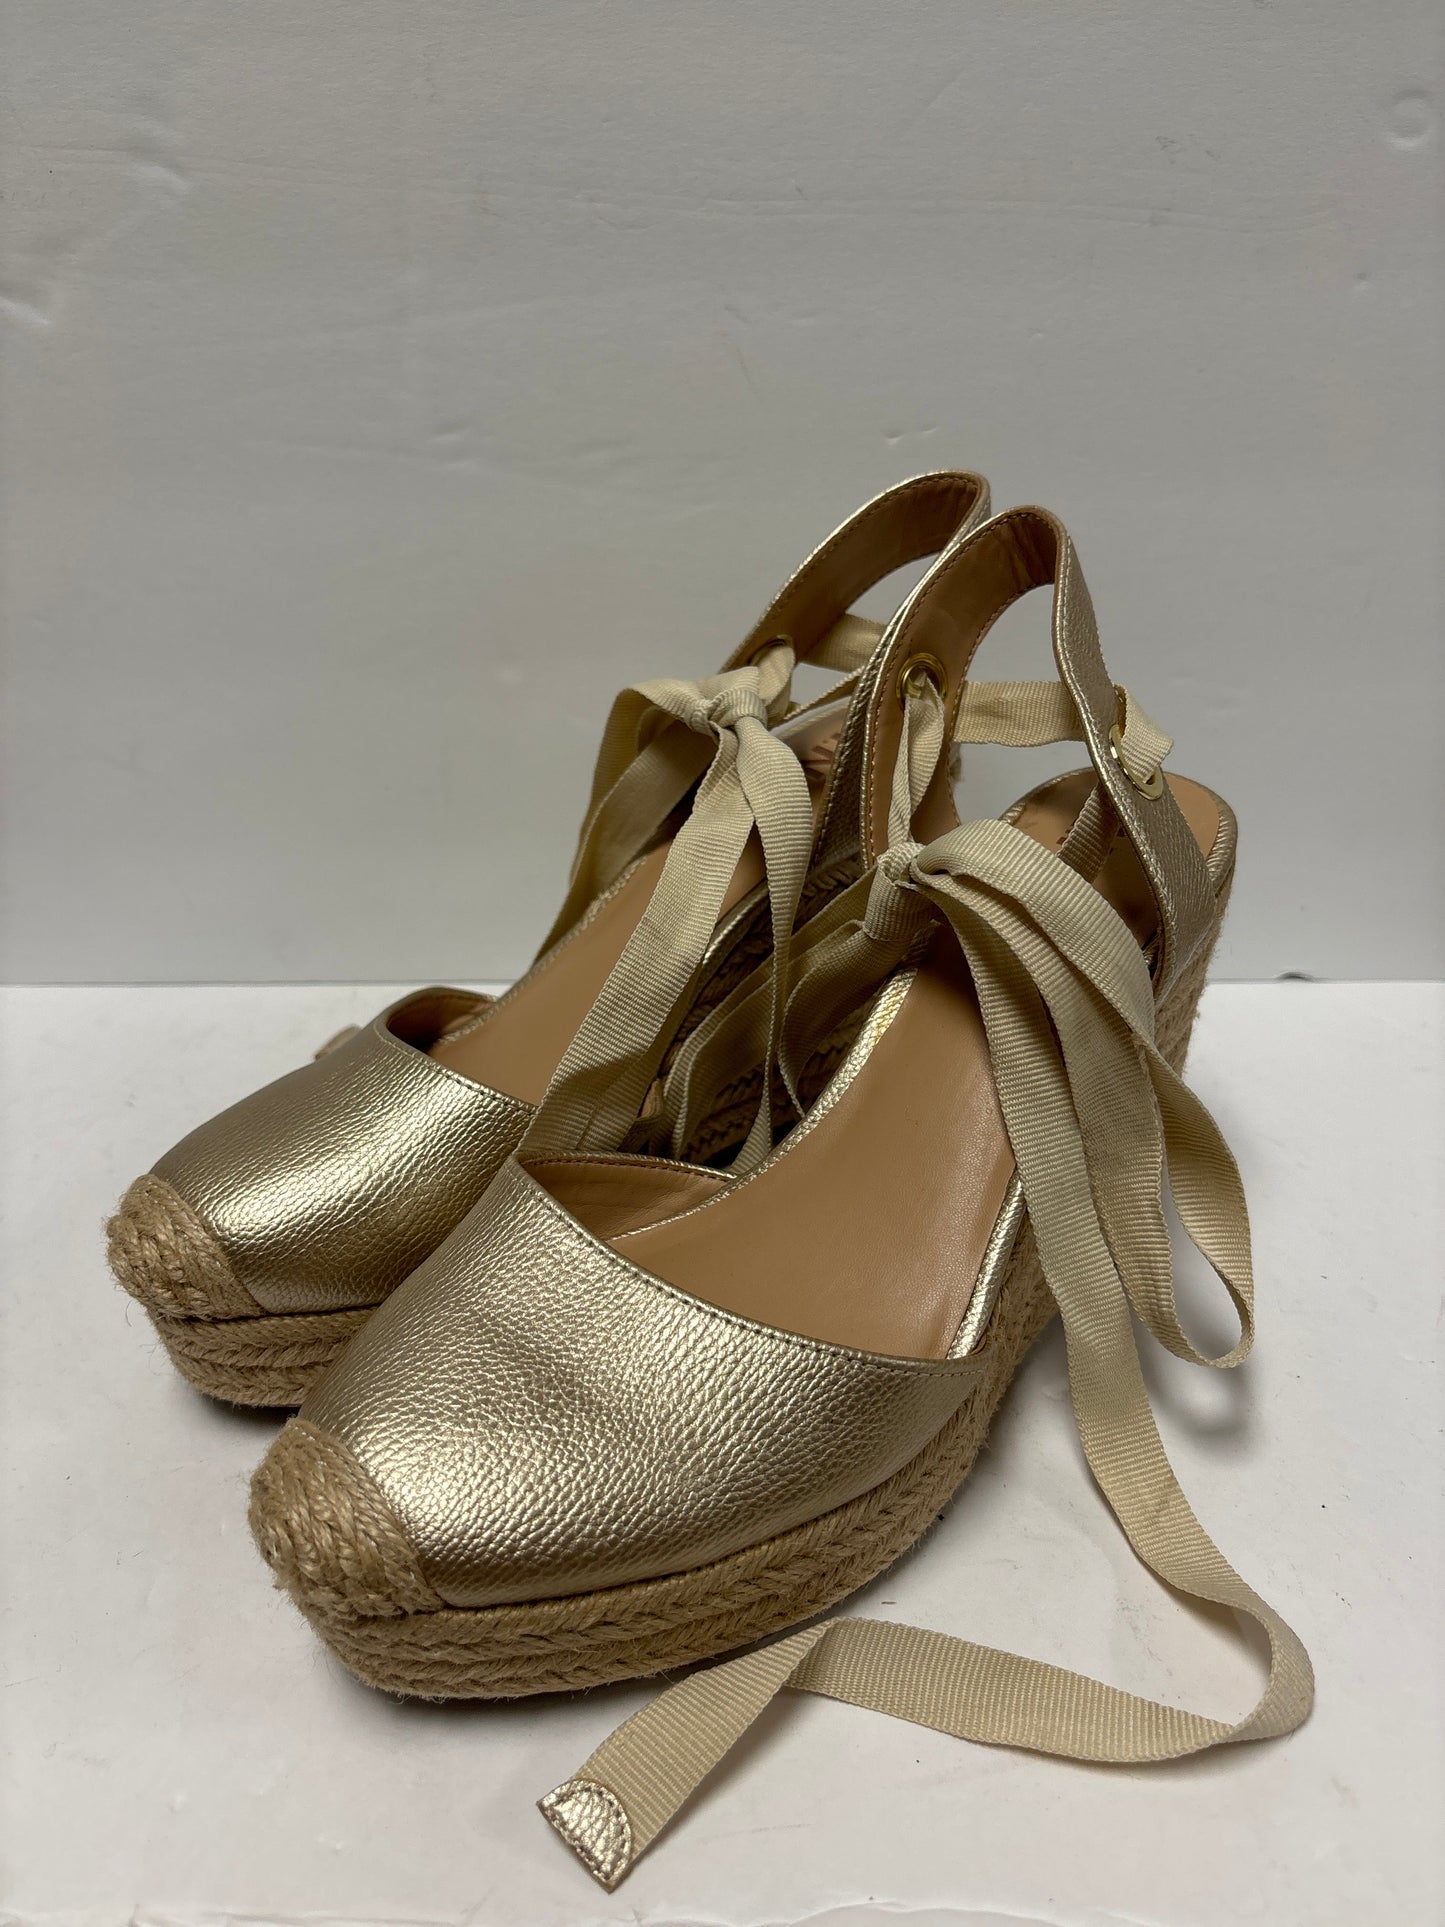 Gold Shoes Heels Wedge Inc, Size 7.5